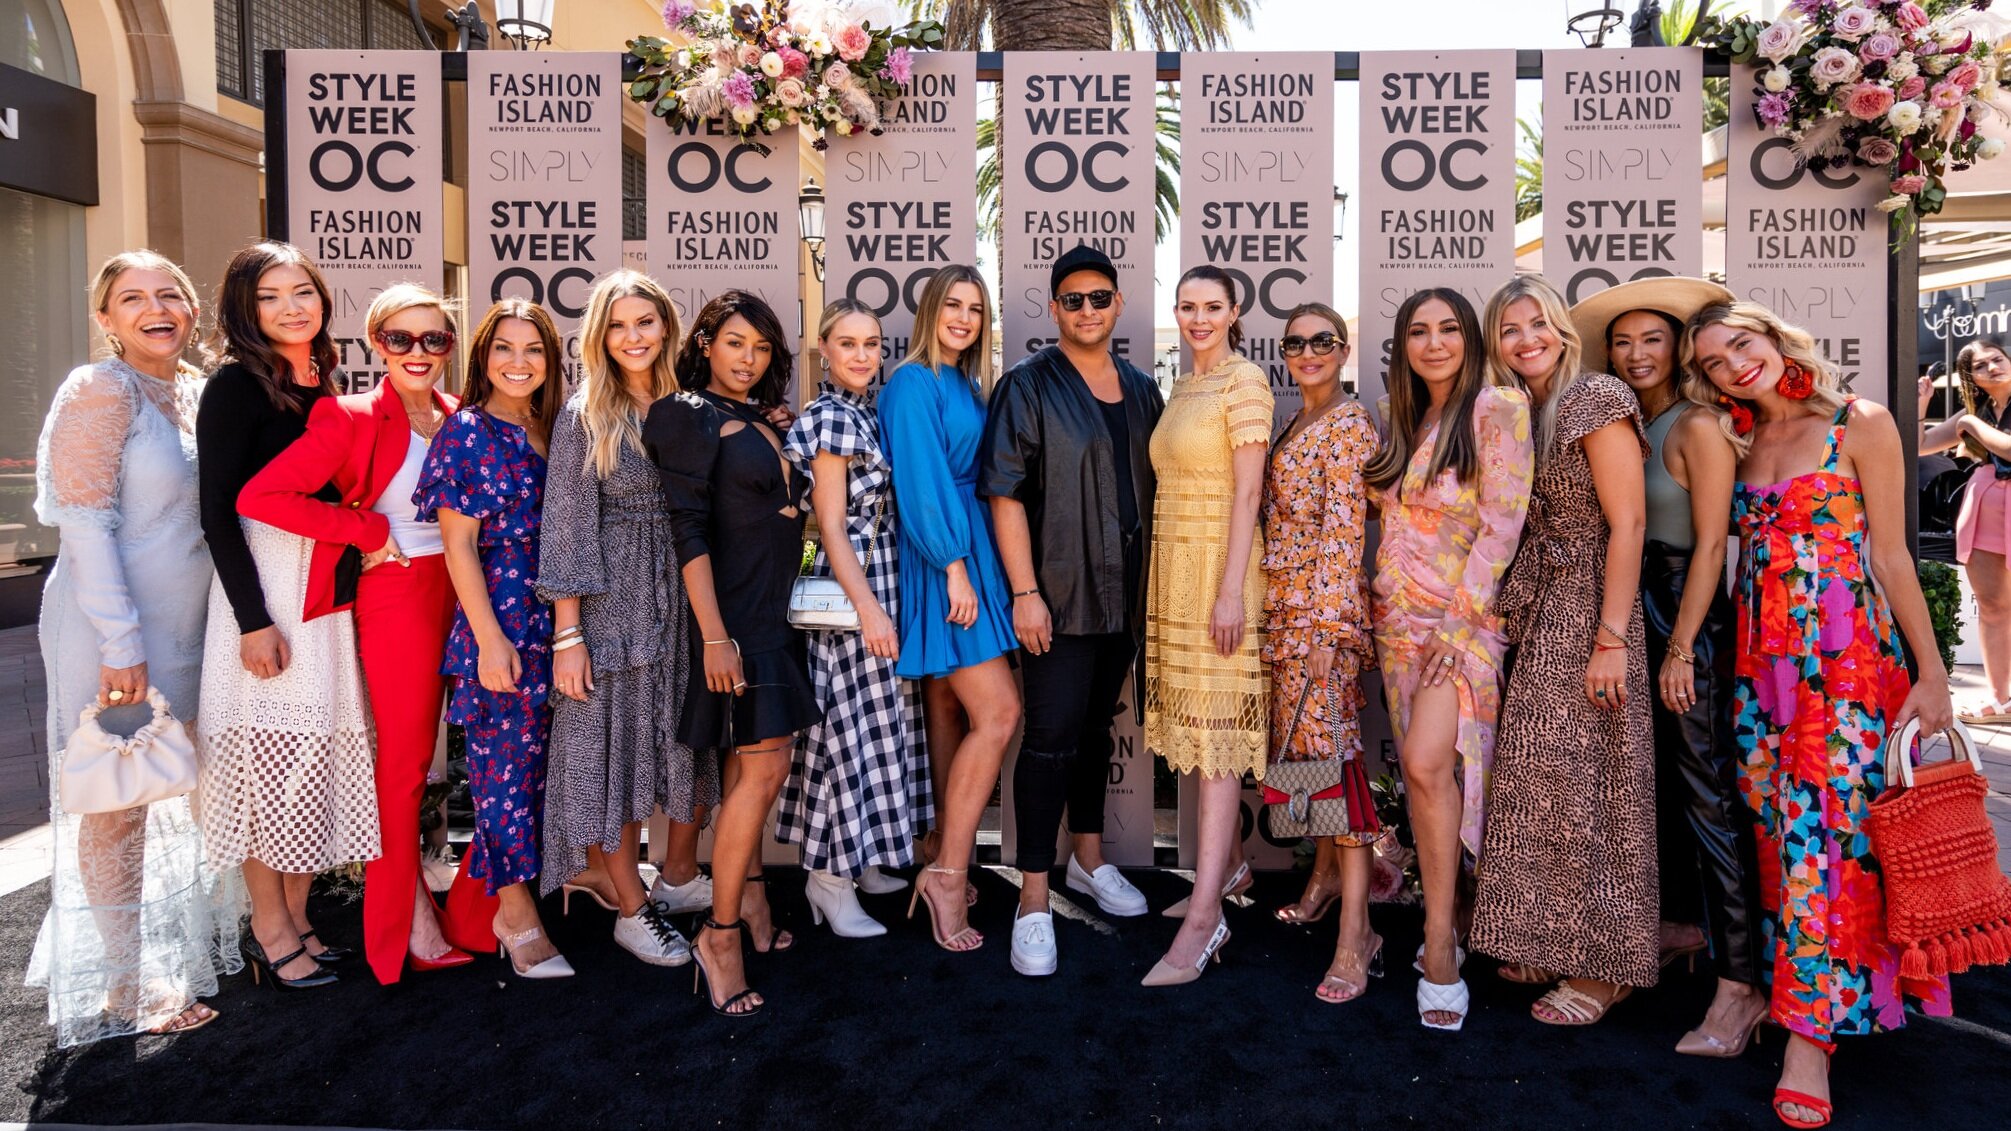 StyleWeekOC kicked off today at Fashion Island with Neiman Marcus Art